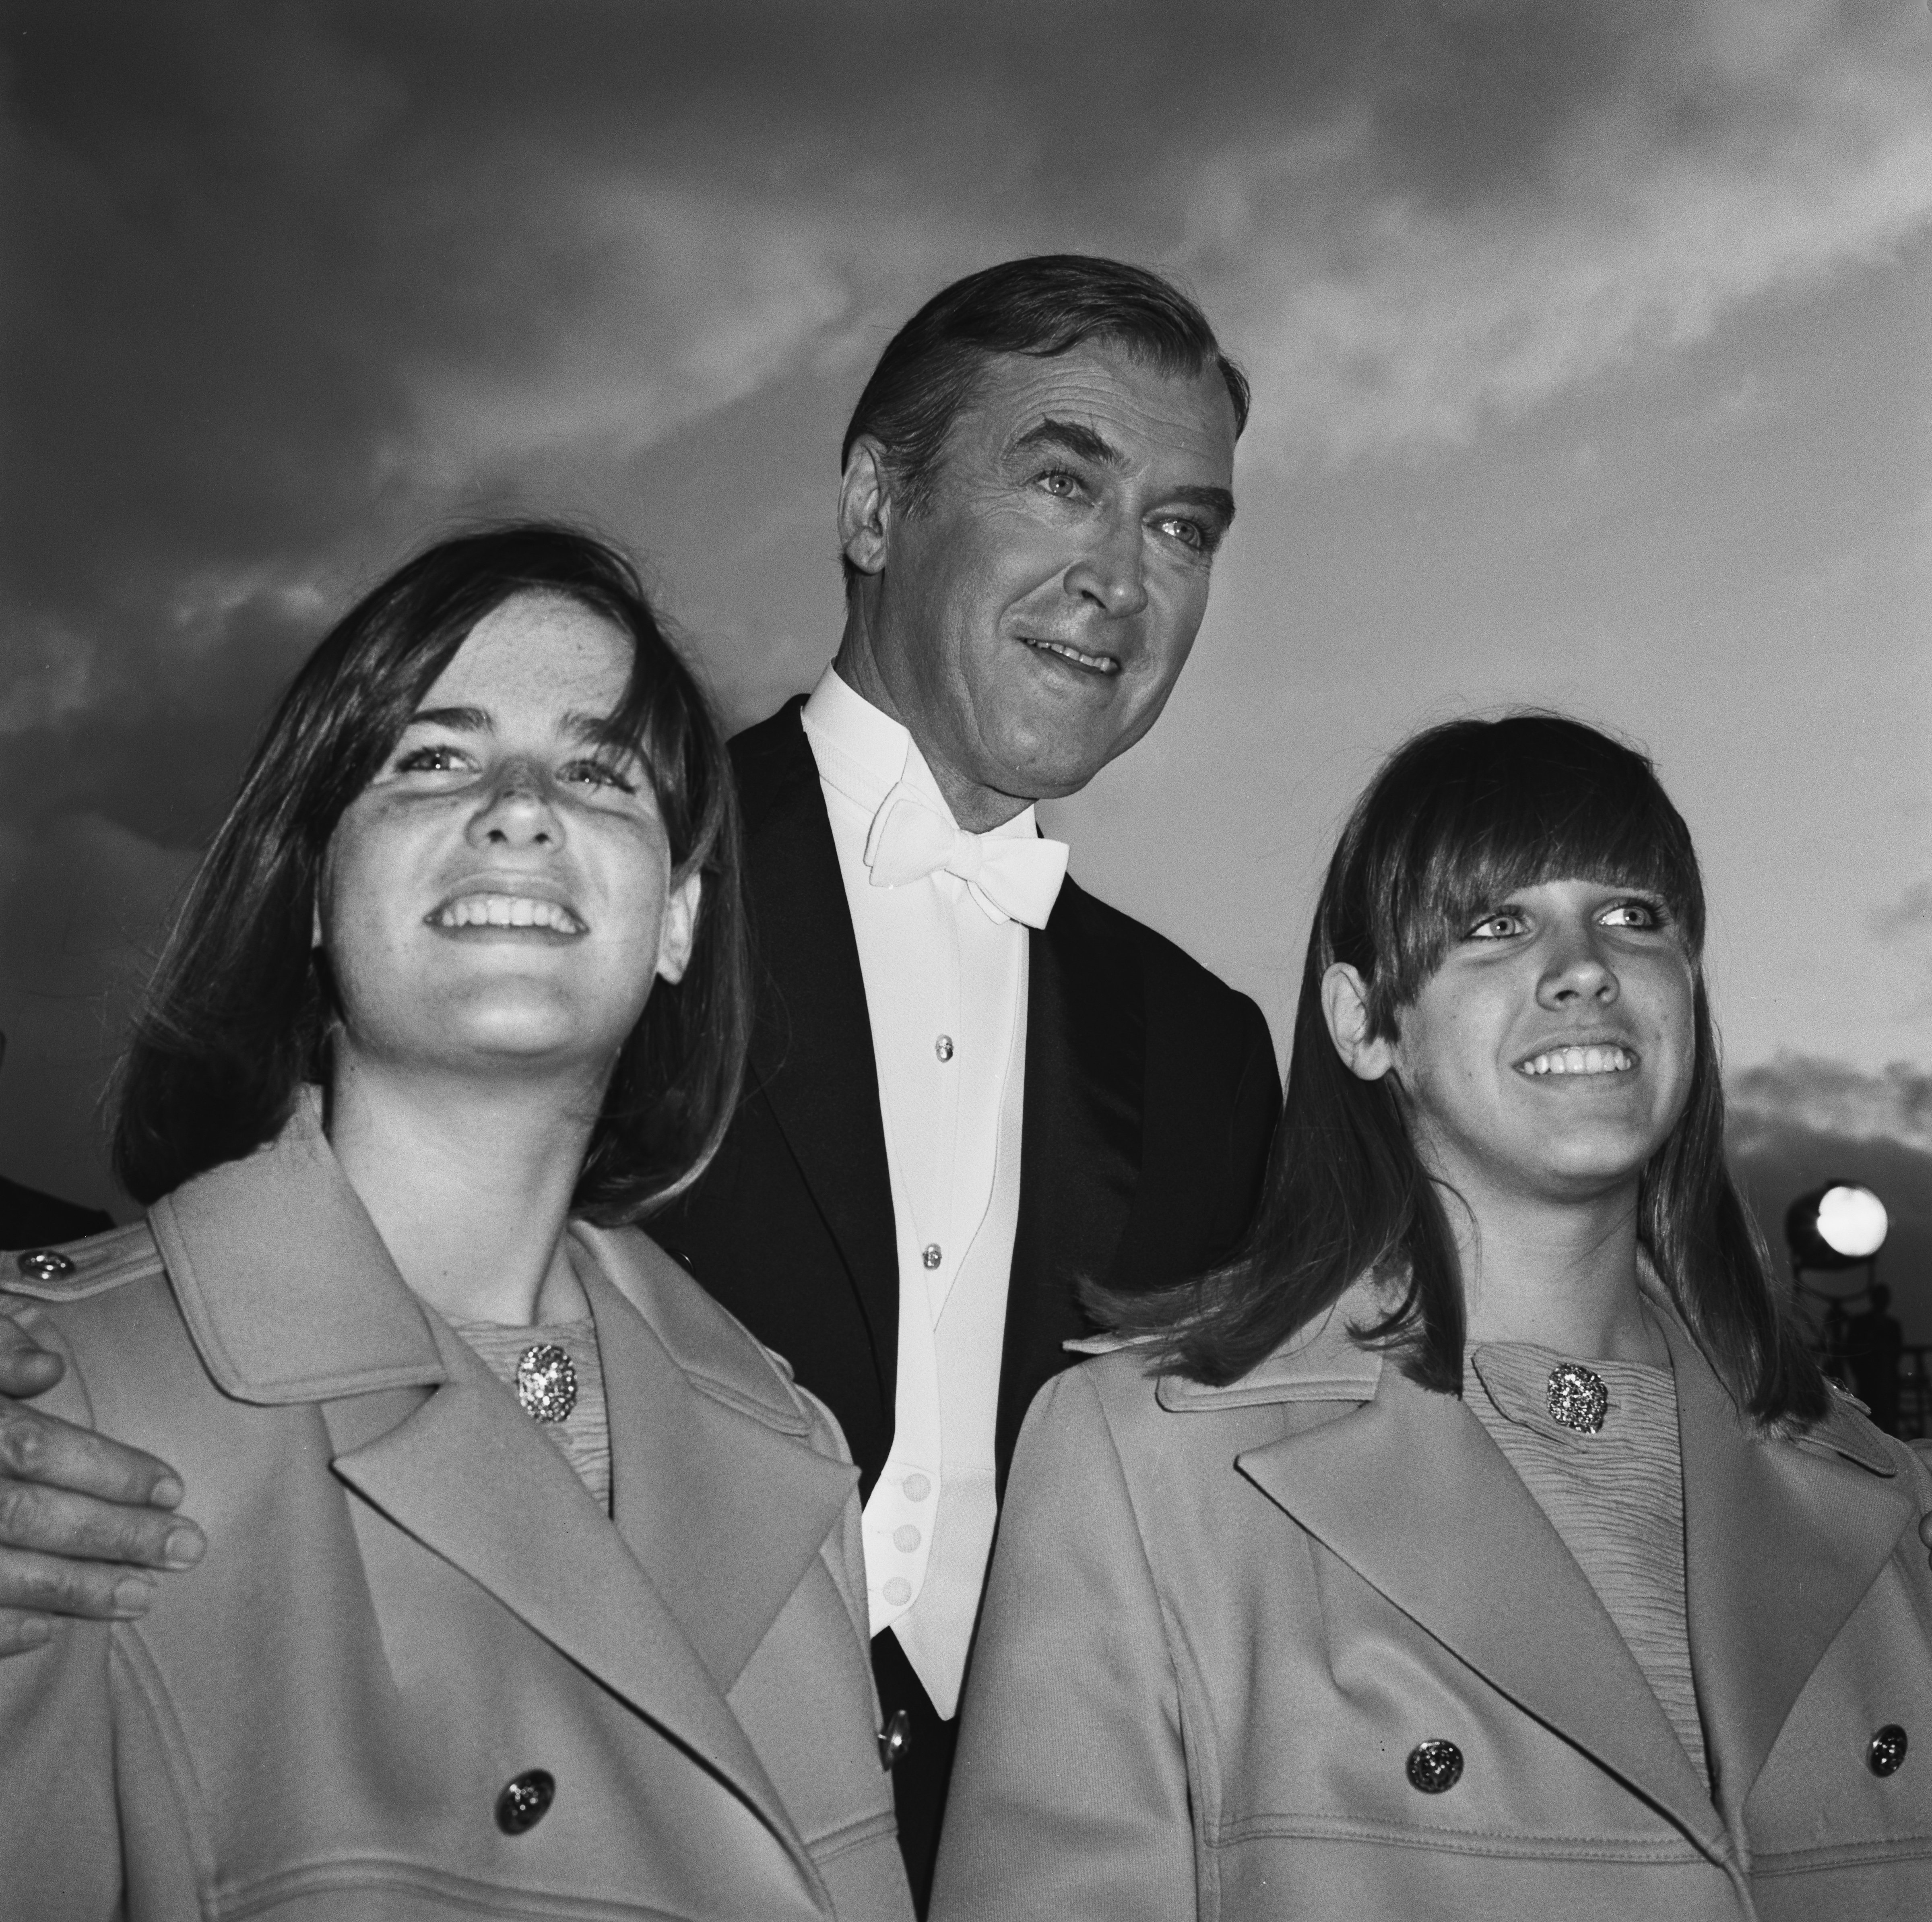 James Stewart and his twin daughters Judy and Kelly at the 39th Academy Awards in Santa Monica, Los Angeles, on April 10, 1967 | Source: Getty Images